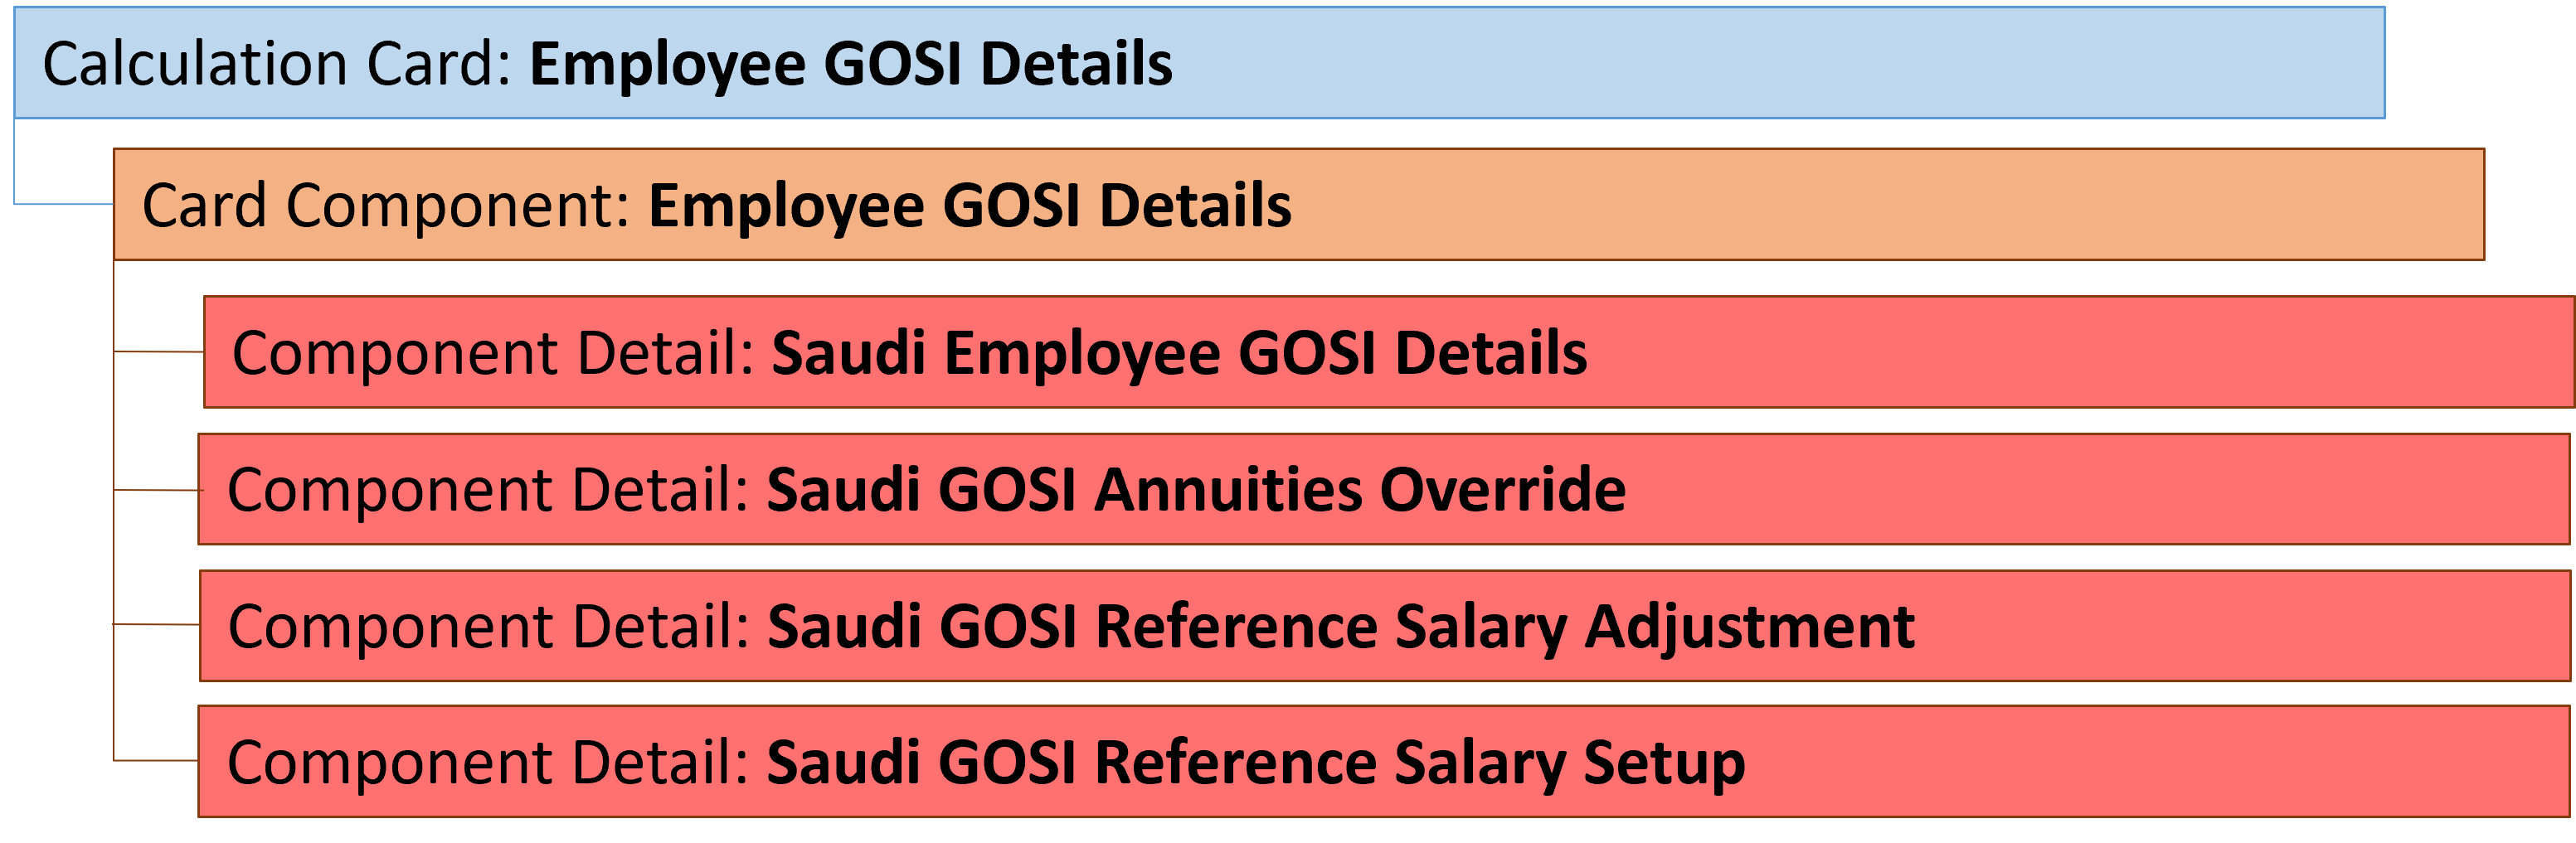 employee gosi details card component